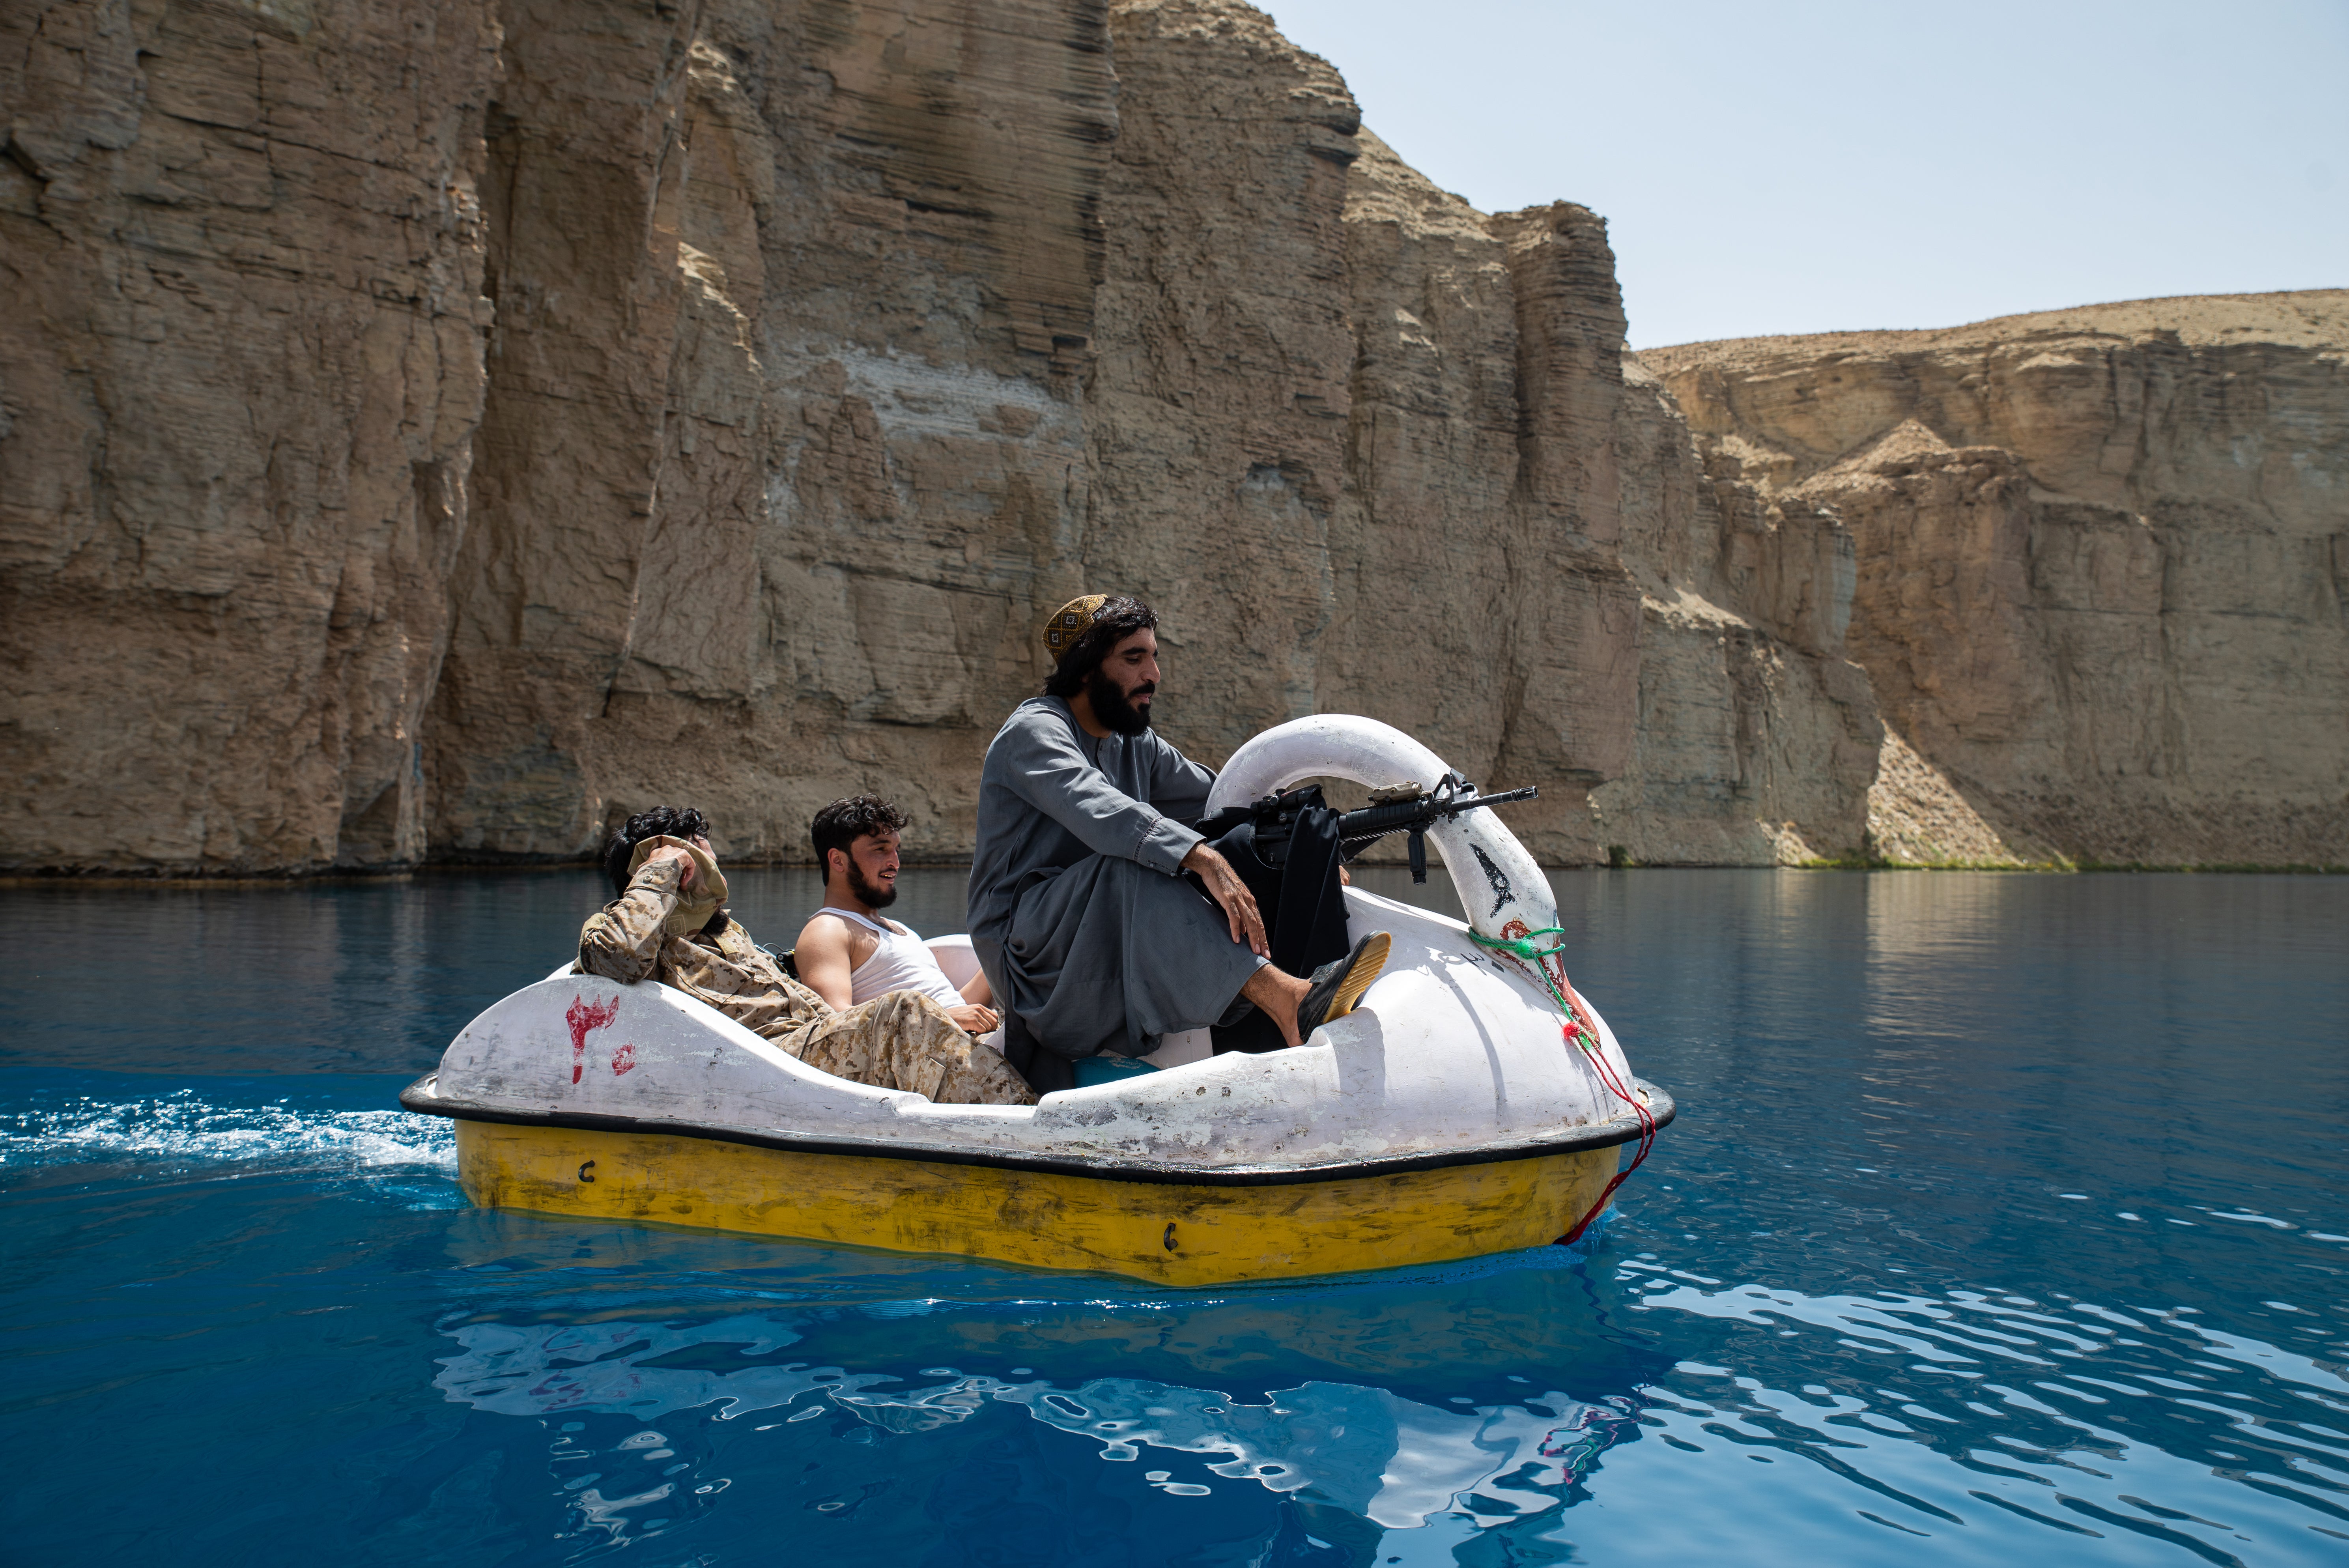 Taliban members paddle in a boat as they and Afghan families enjoy a visit to one of the lakes in Band-e Amir national park, a popular week-end destination